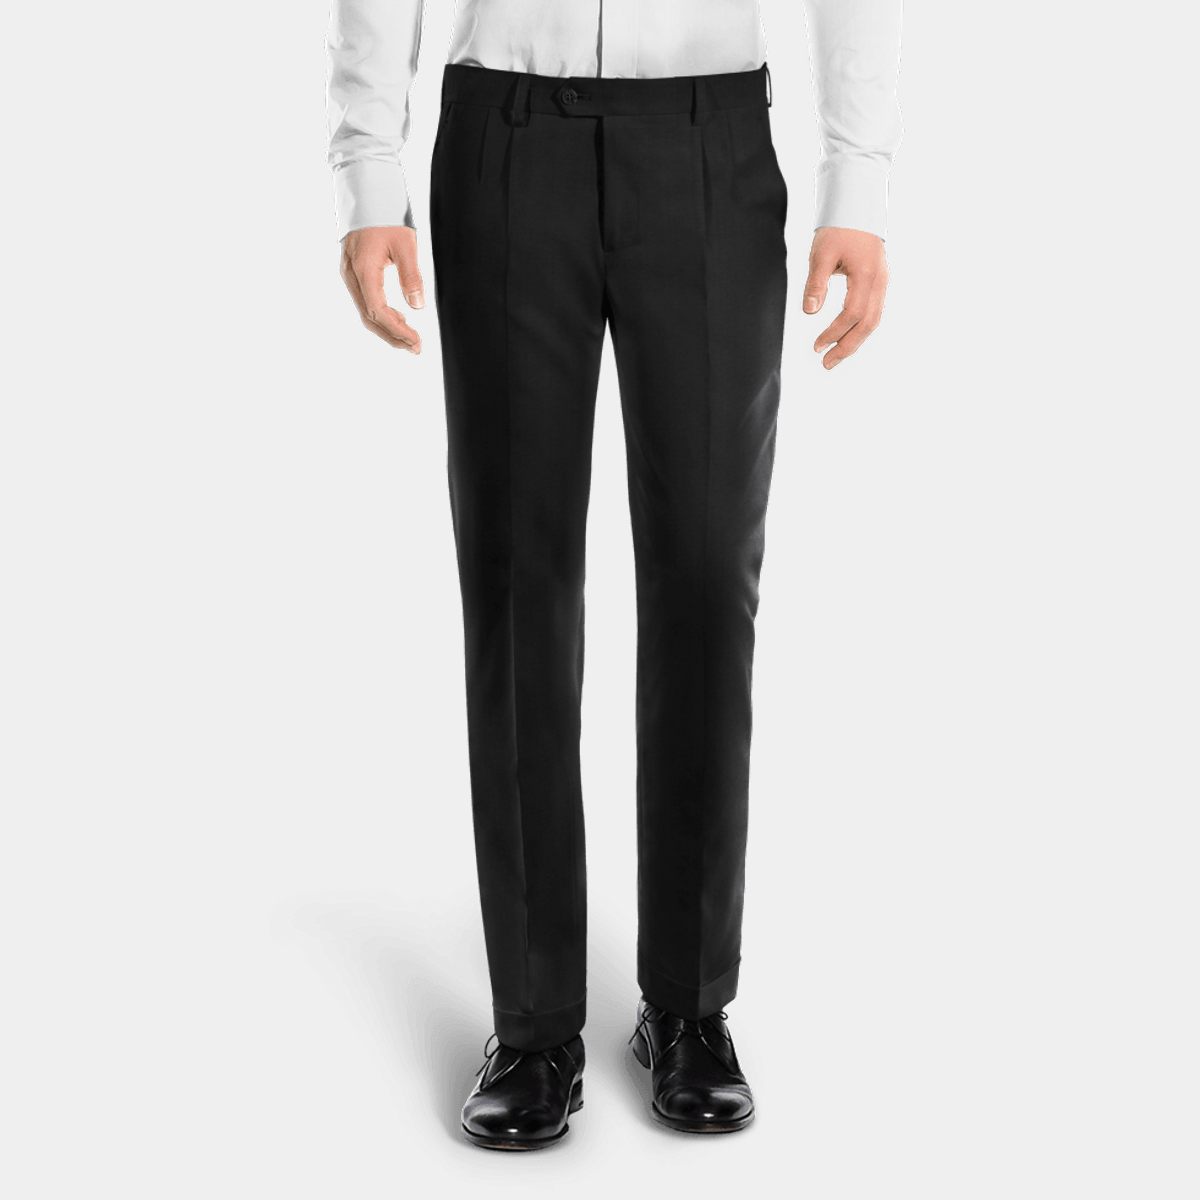 Leisure fit trousers with double pleats (232ME226E1920C573005) for Man |  Brunello Cucinelli